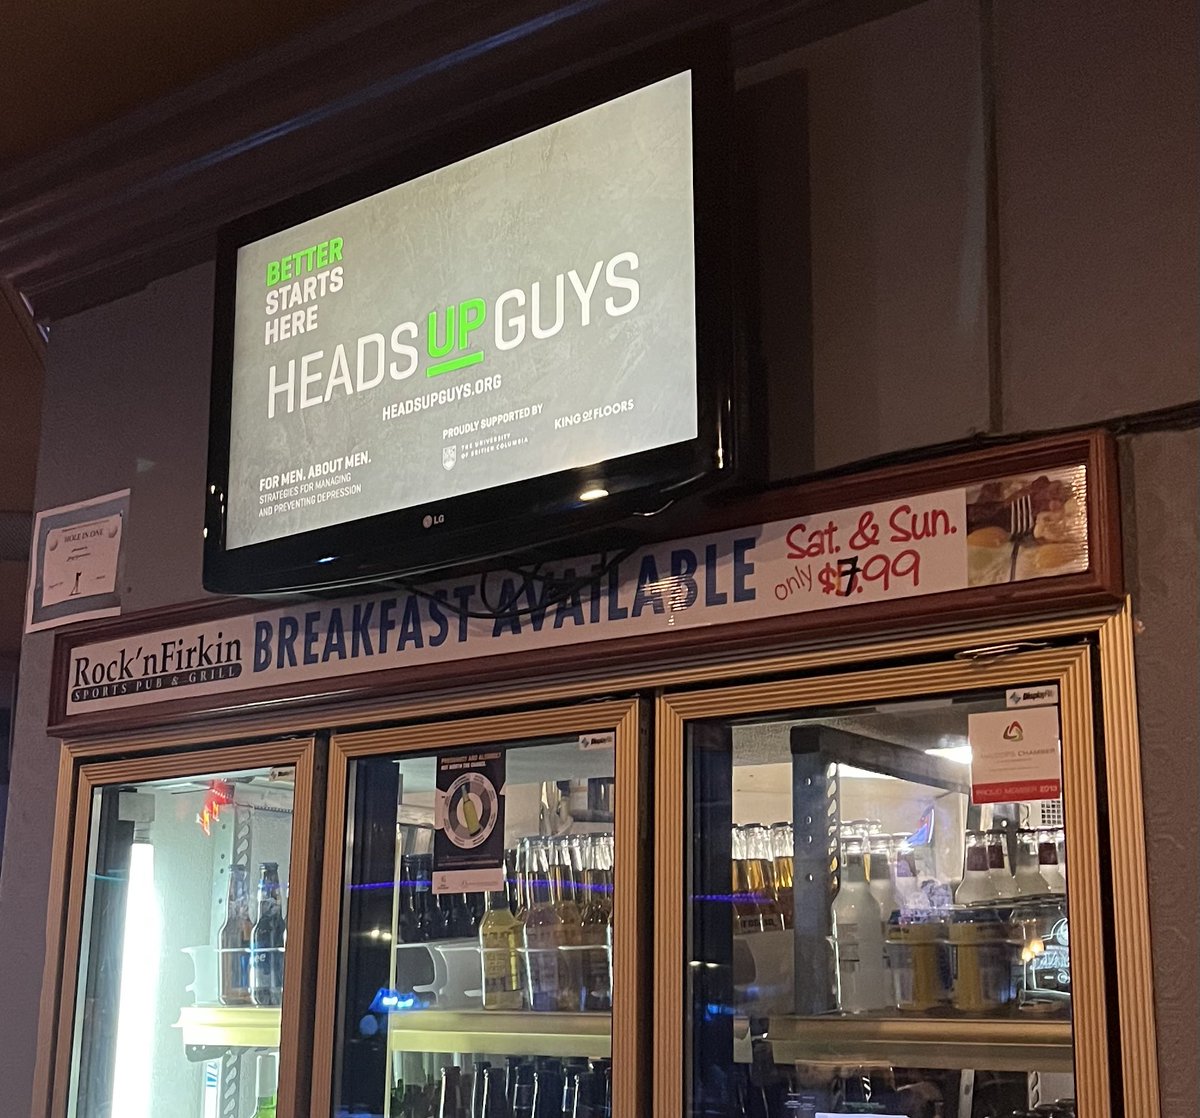 Good to see @HeadsUpGuys ad during hockey game & #WingNight @ local watering hole:)
#MensMentalHealth